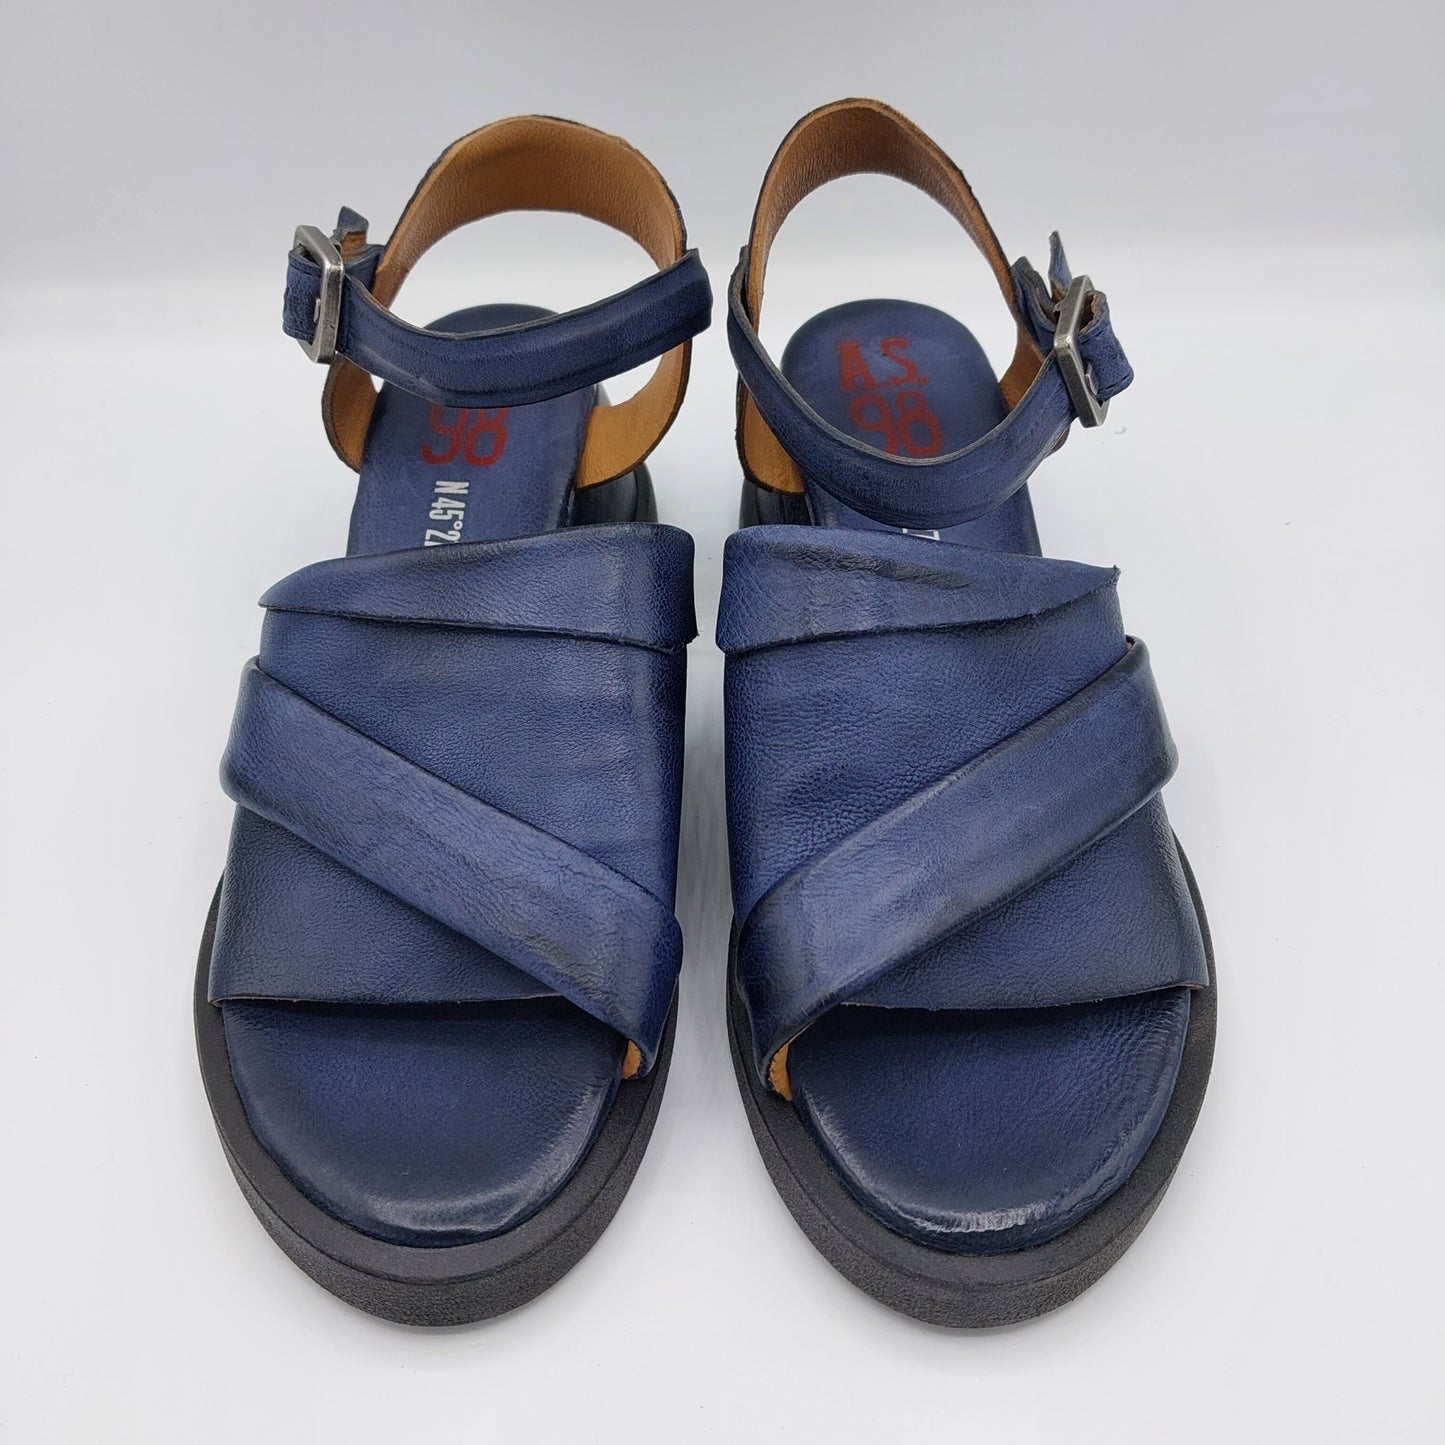 AS98 sandal in blue leather